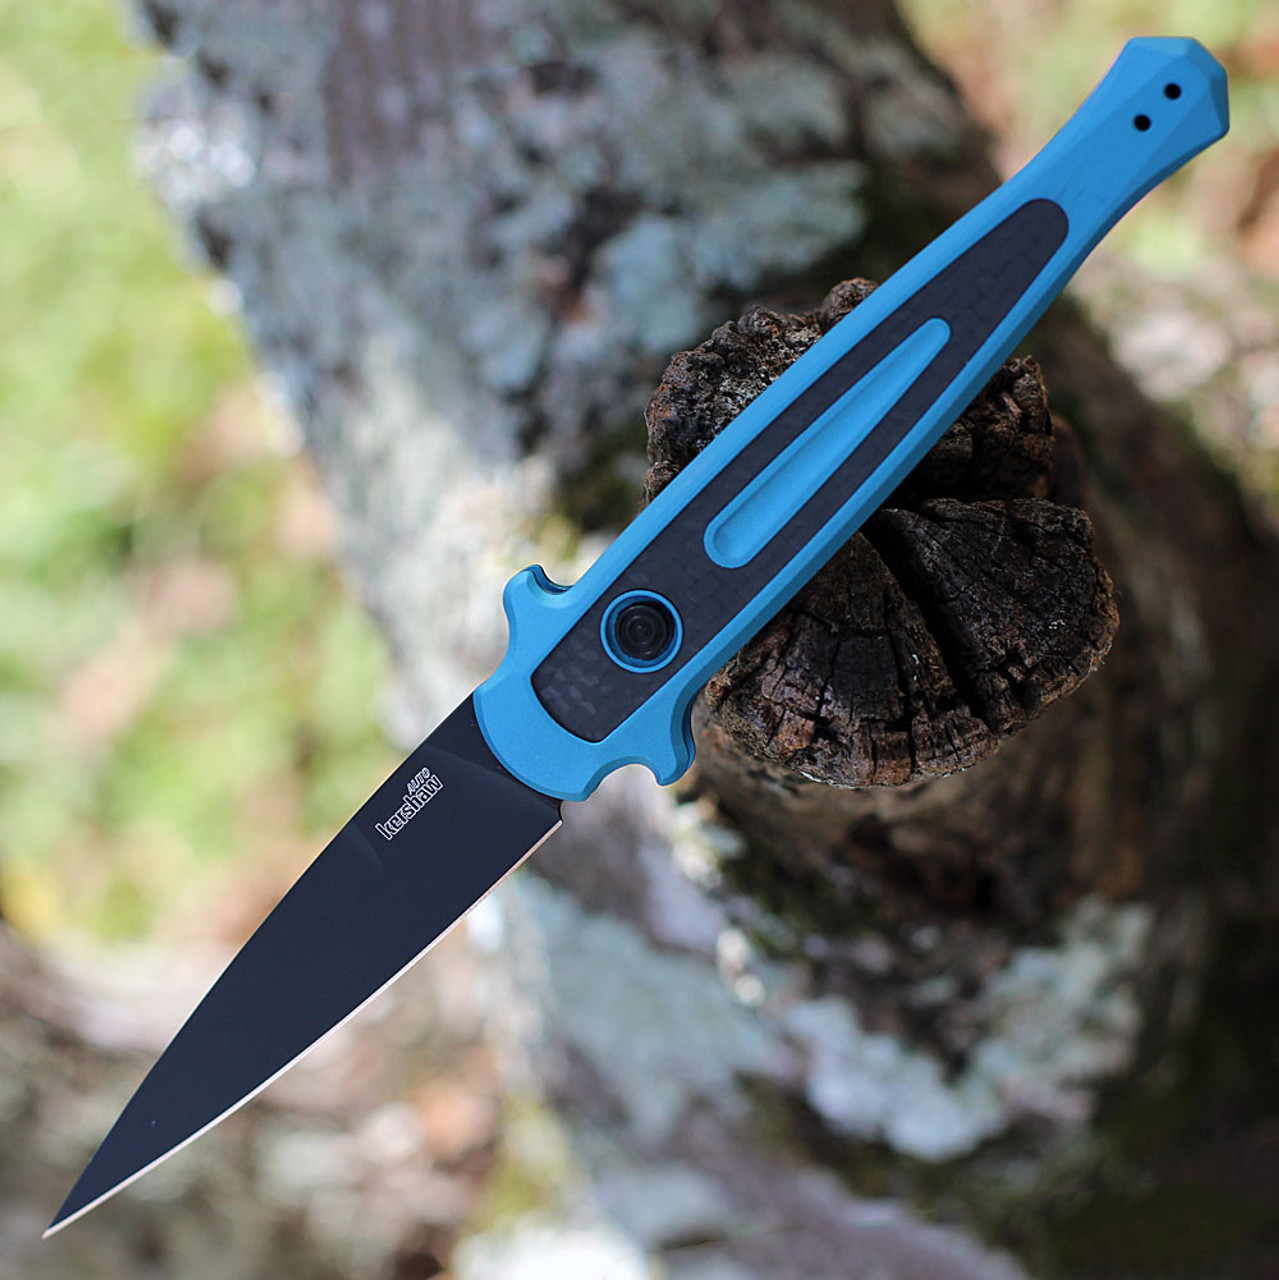 Kershaw Launch 8 Automatic Knife (7150TEALBLK)- 3.50" Black CPM-154 Spear Point Plain Blade, Teal Aluminum w/ Carbon Fiber Inlay Handle